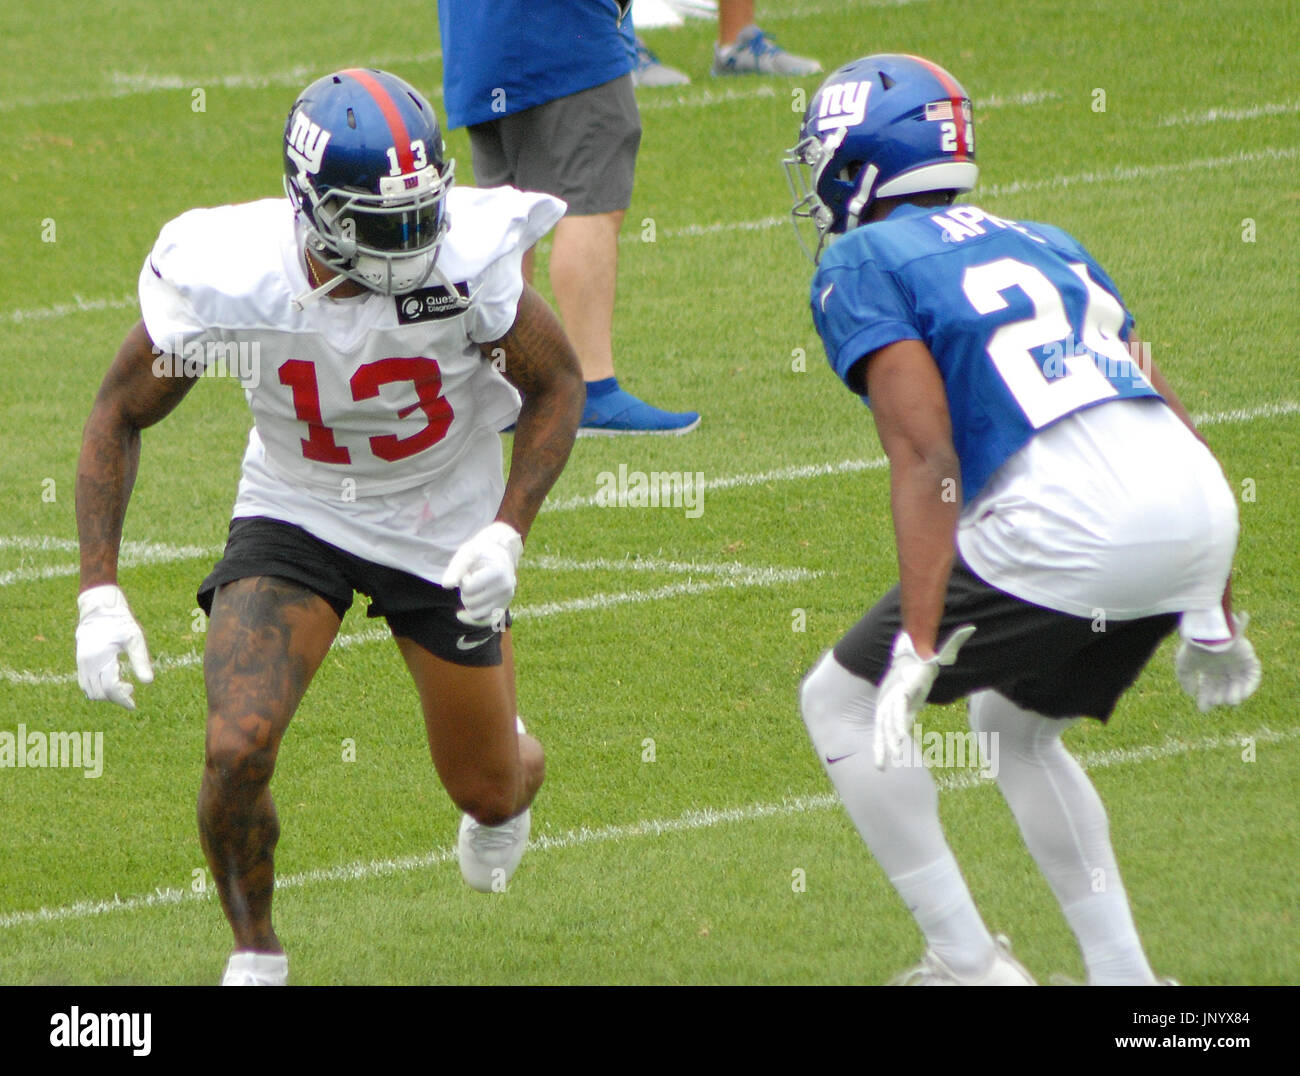 East Rutherford, USA. 29th Jul, 2017. The New York Football Giants took to the practice field in East Rutherford, NJ for NFL Training Camp on July 29, 2017. Odell Beckham Jr. and Brandon Marshall made plays at practice that excited the fans that were on hand to view the team. Credit: Roy Caratozzolo III/Alamy Live News Stock Photo